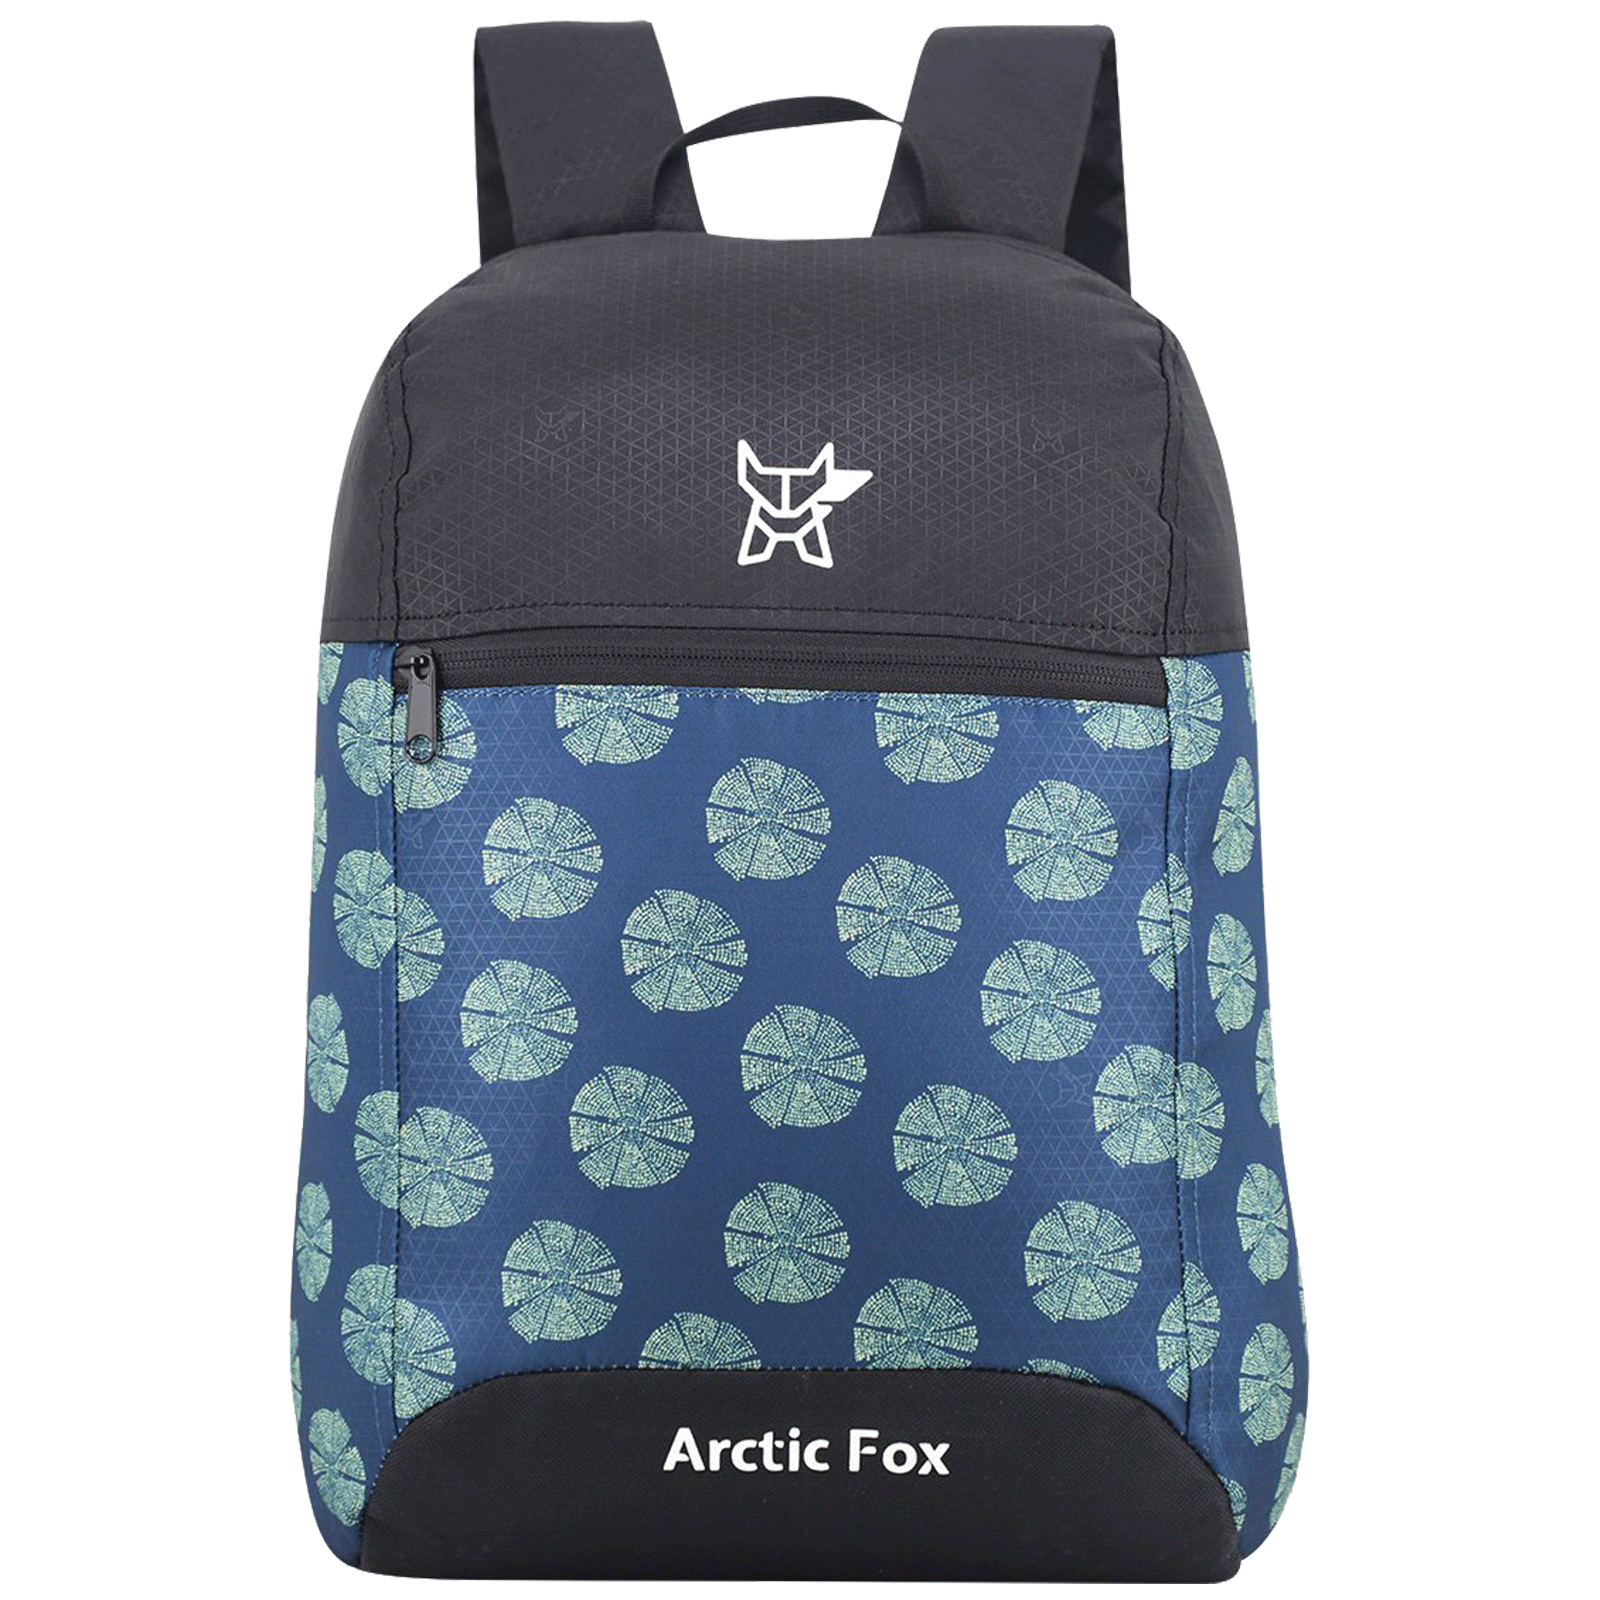 Arctic Fox Tuition Dart 17 Liters Polyester Backpack (Water Repellent Fabric, FMIBPKDBLWO075017, Black)_1